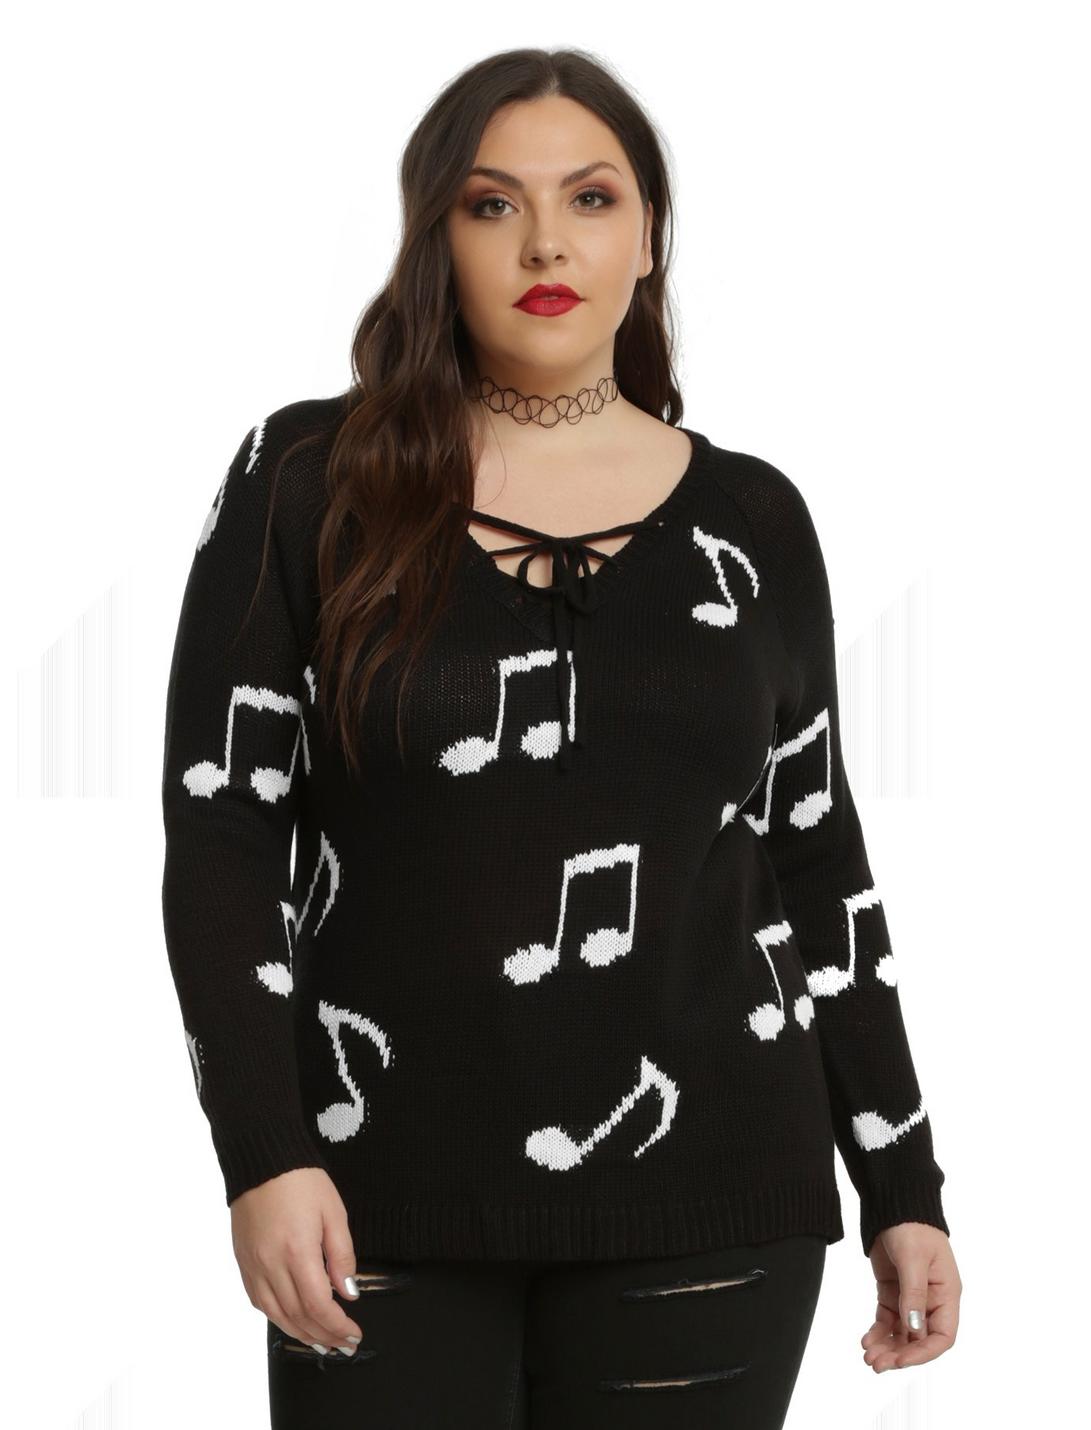 Black & White Music Note Lace-Up Girls Sweater Plus Size, BLACK, hi-res